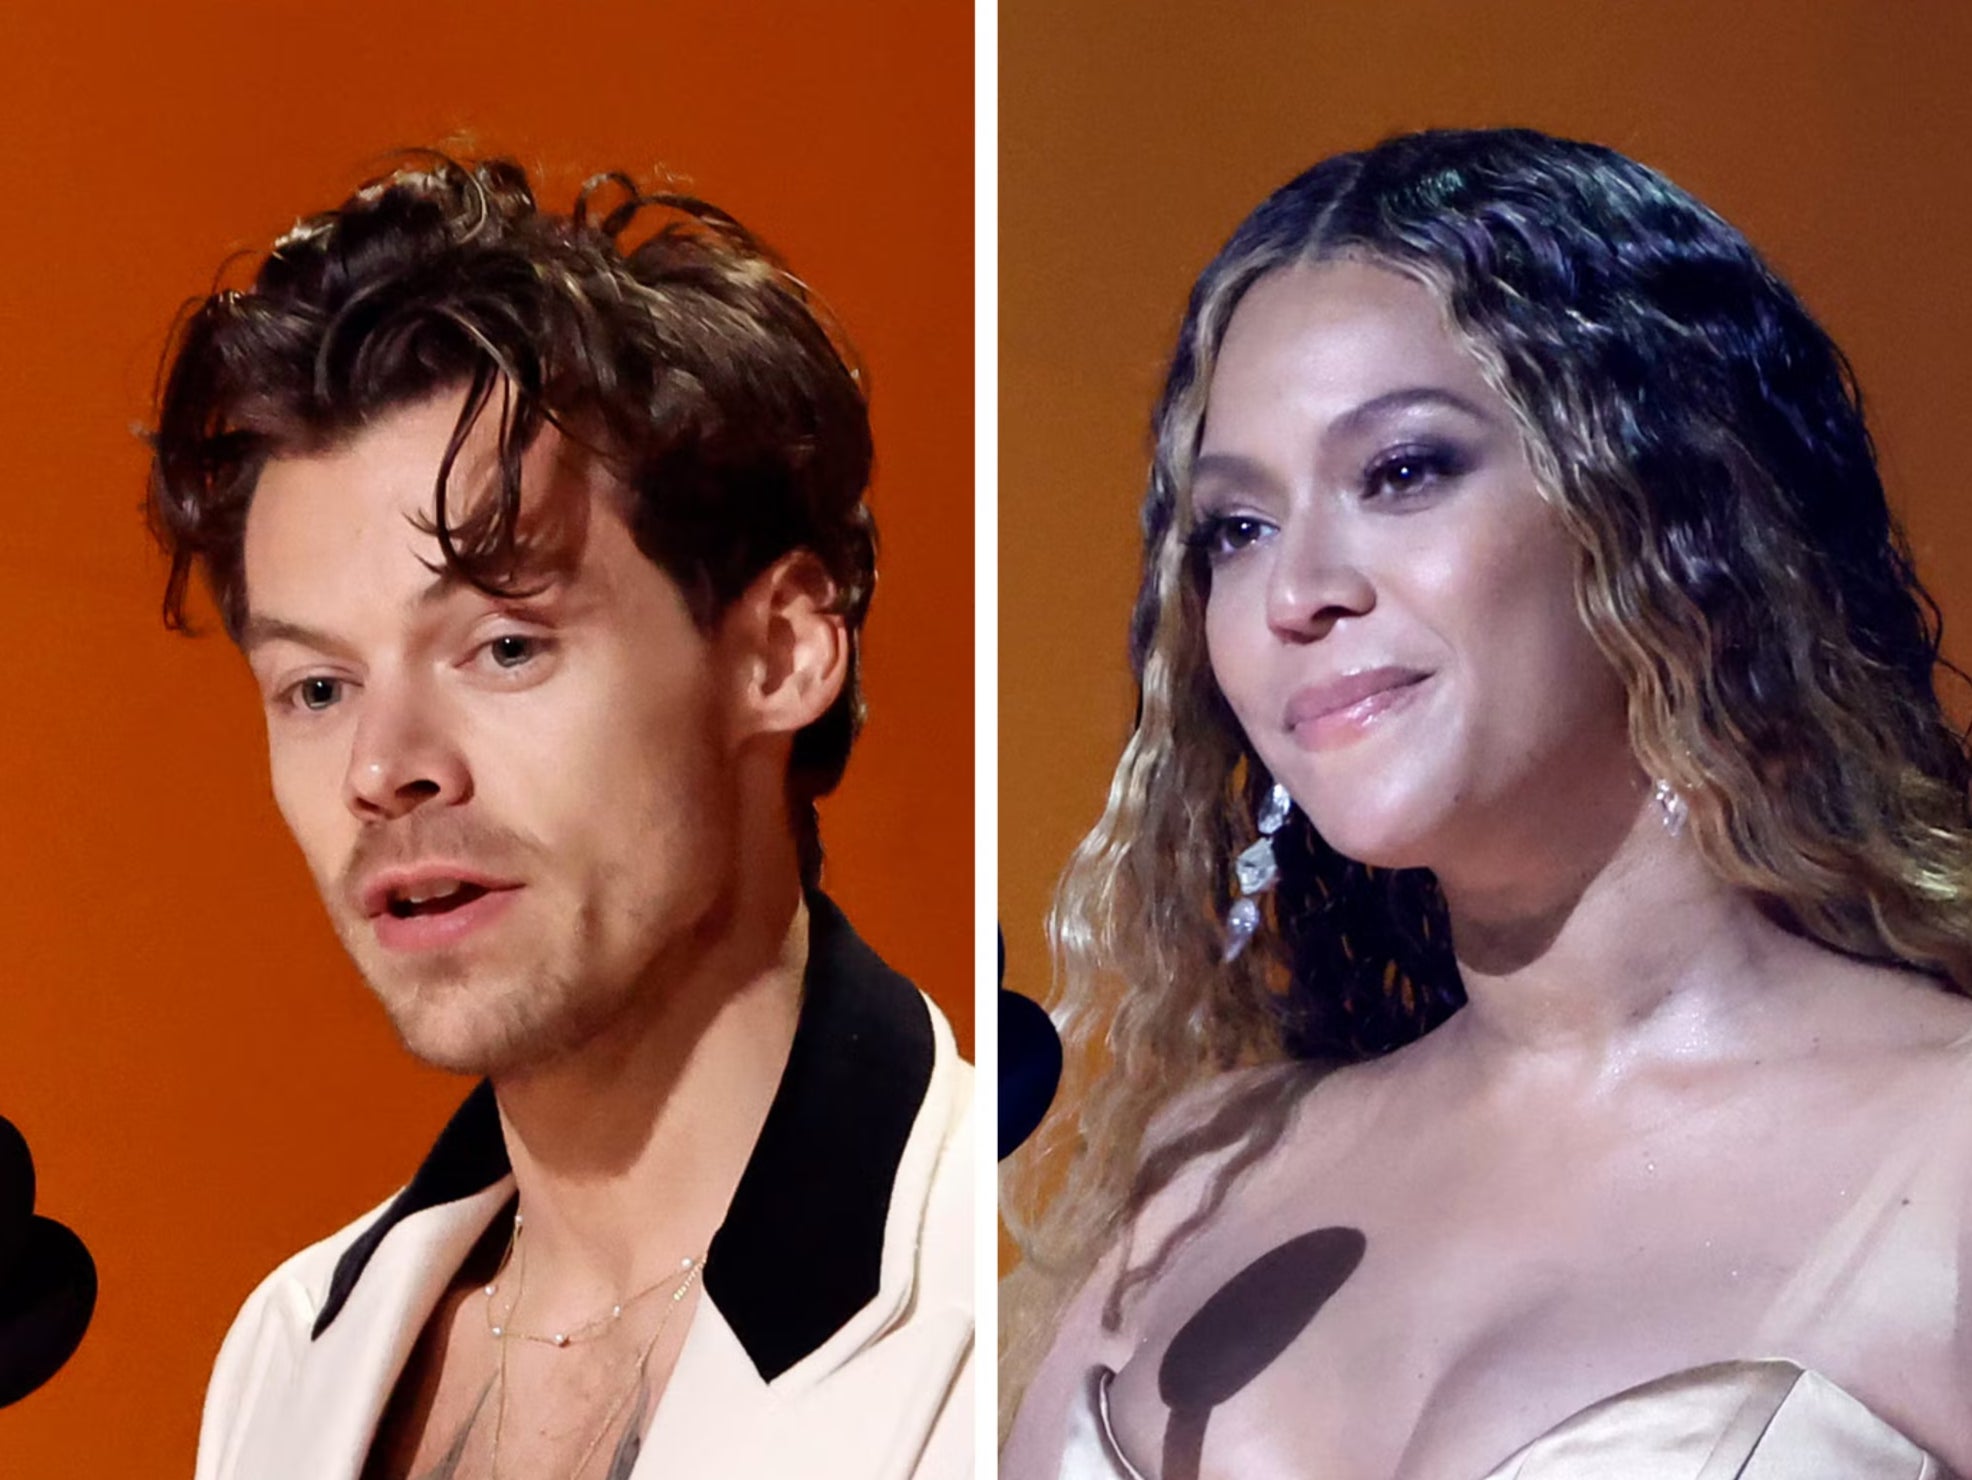 https://static.independent.co.uk/2023/02/06/22/Harry-Styles-beyonce.jpg